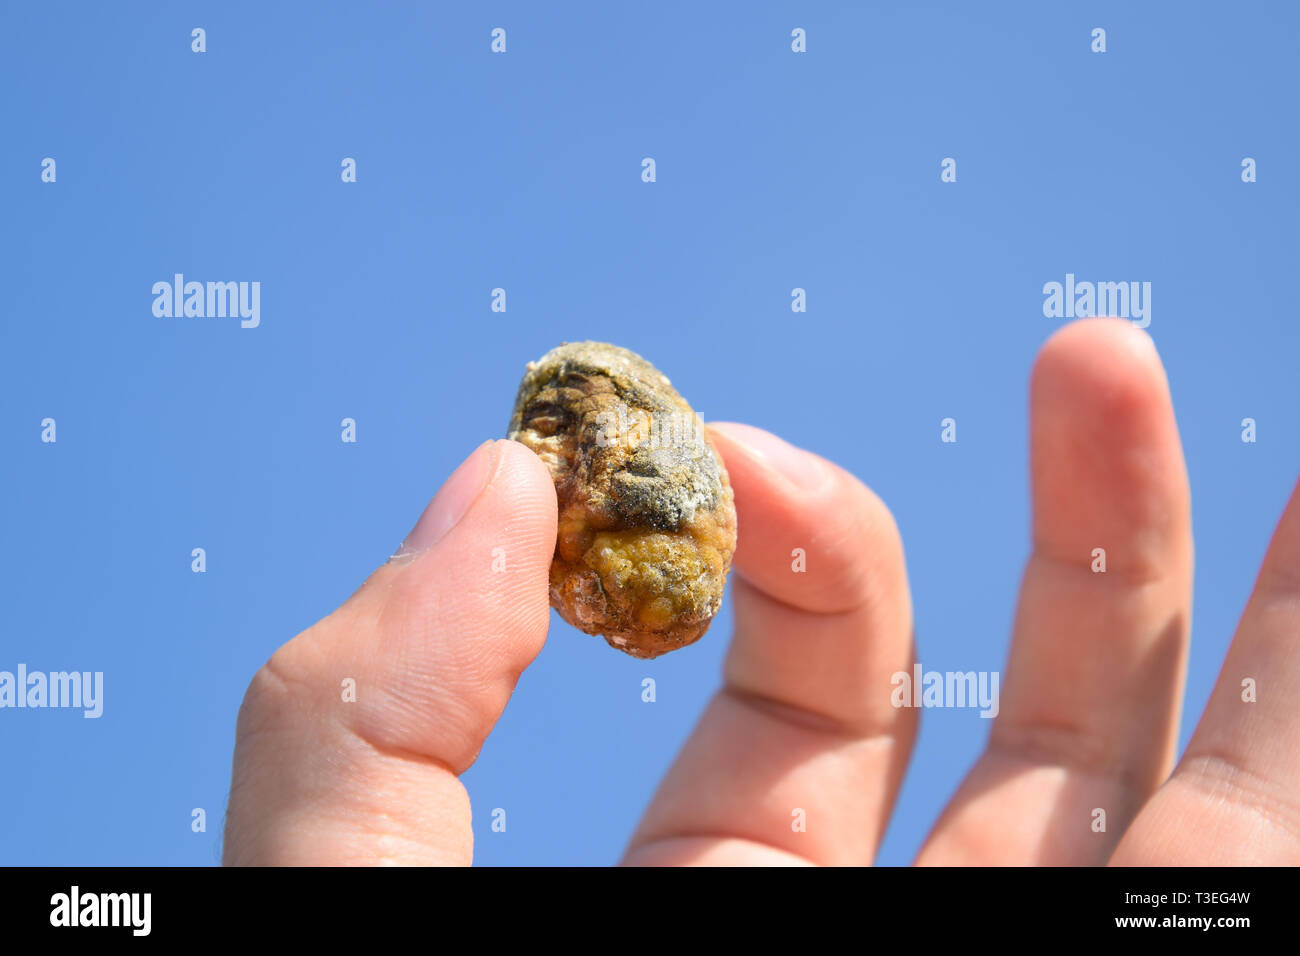 Stone of the gallbladder. The result of gallstones. A calculus of heterogeneous composition against a blue sky. Stock Photo